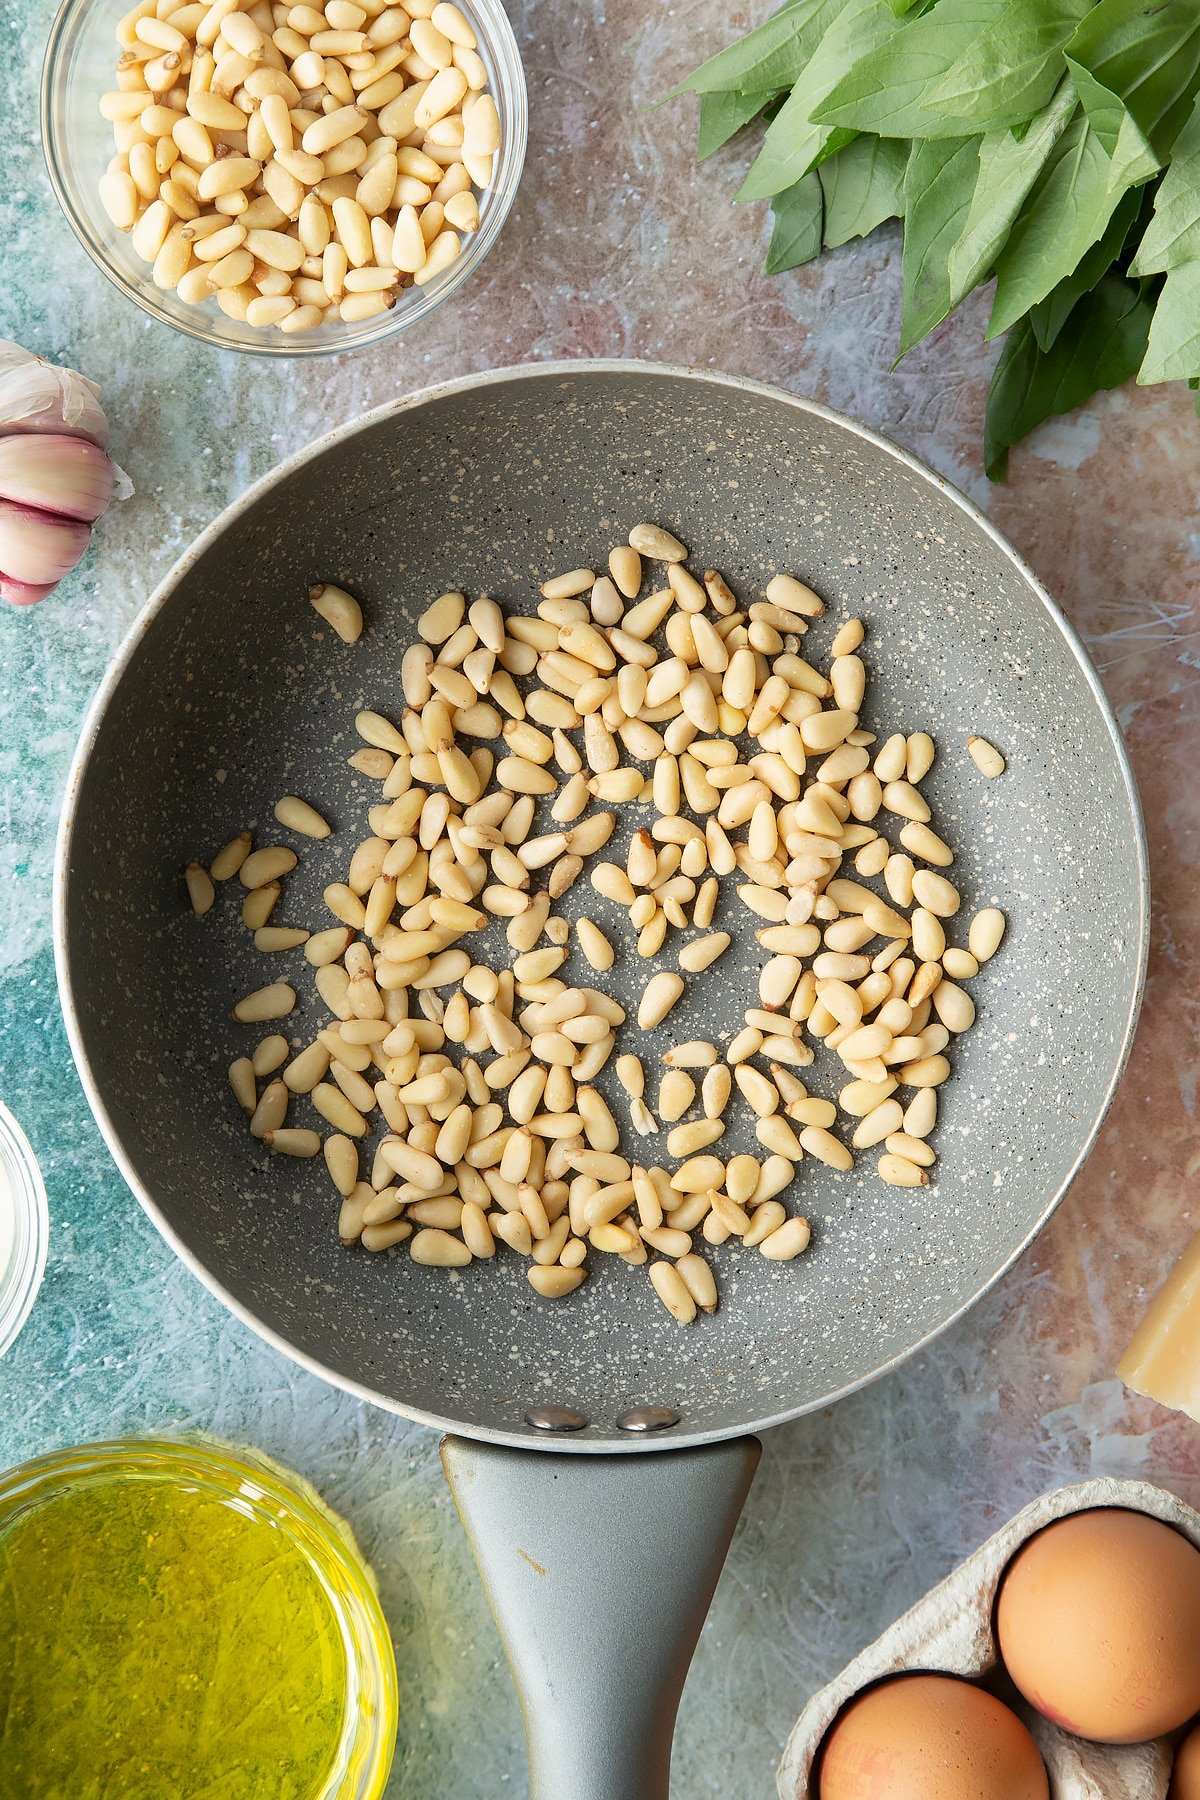 Pine nuts in a small frying pan. Ingredients to make pesto mayo surround the pan.